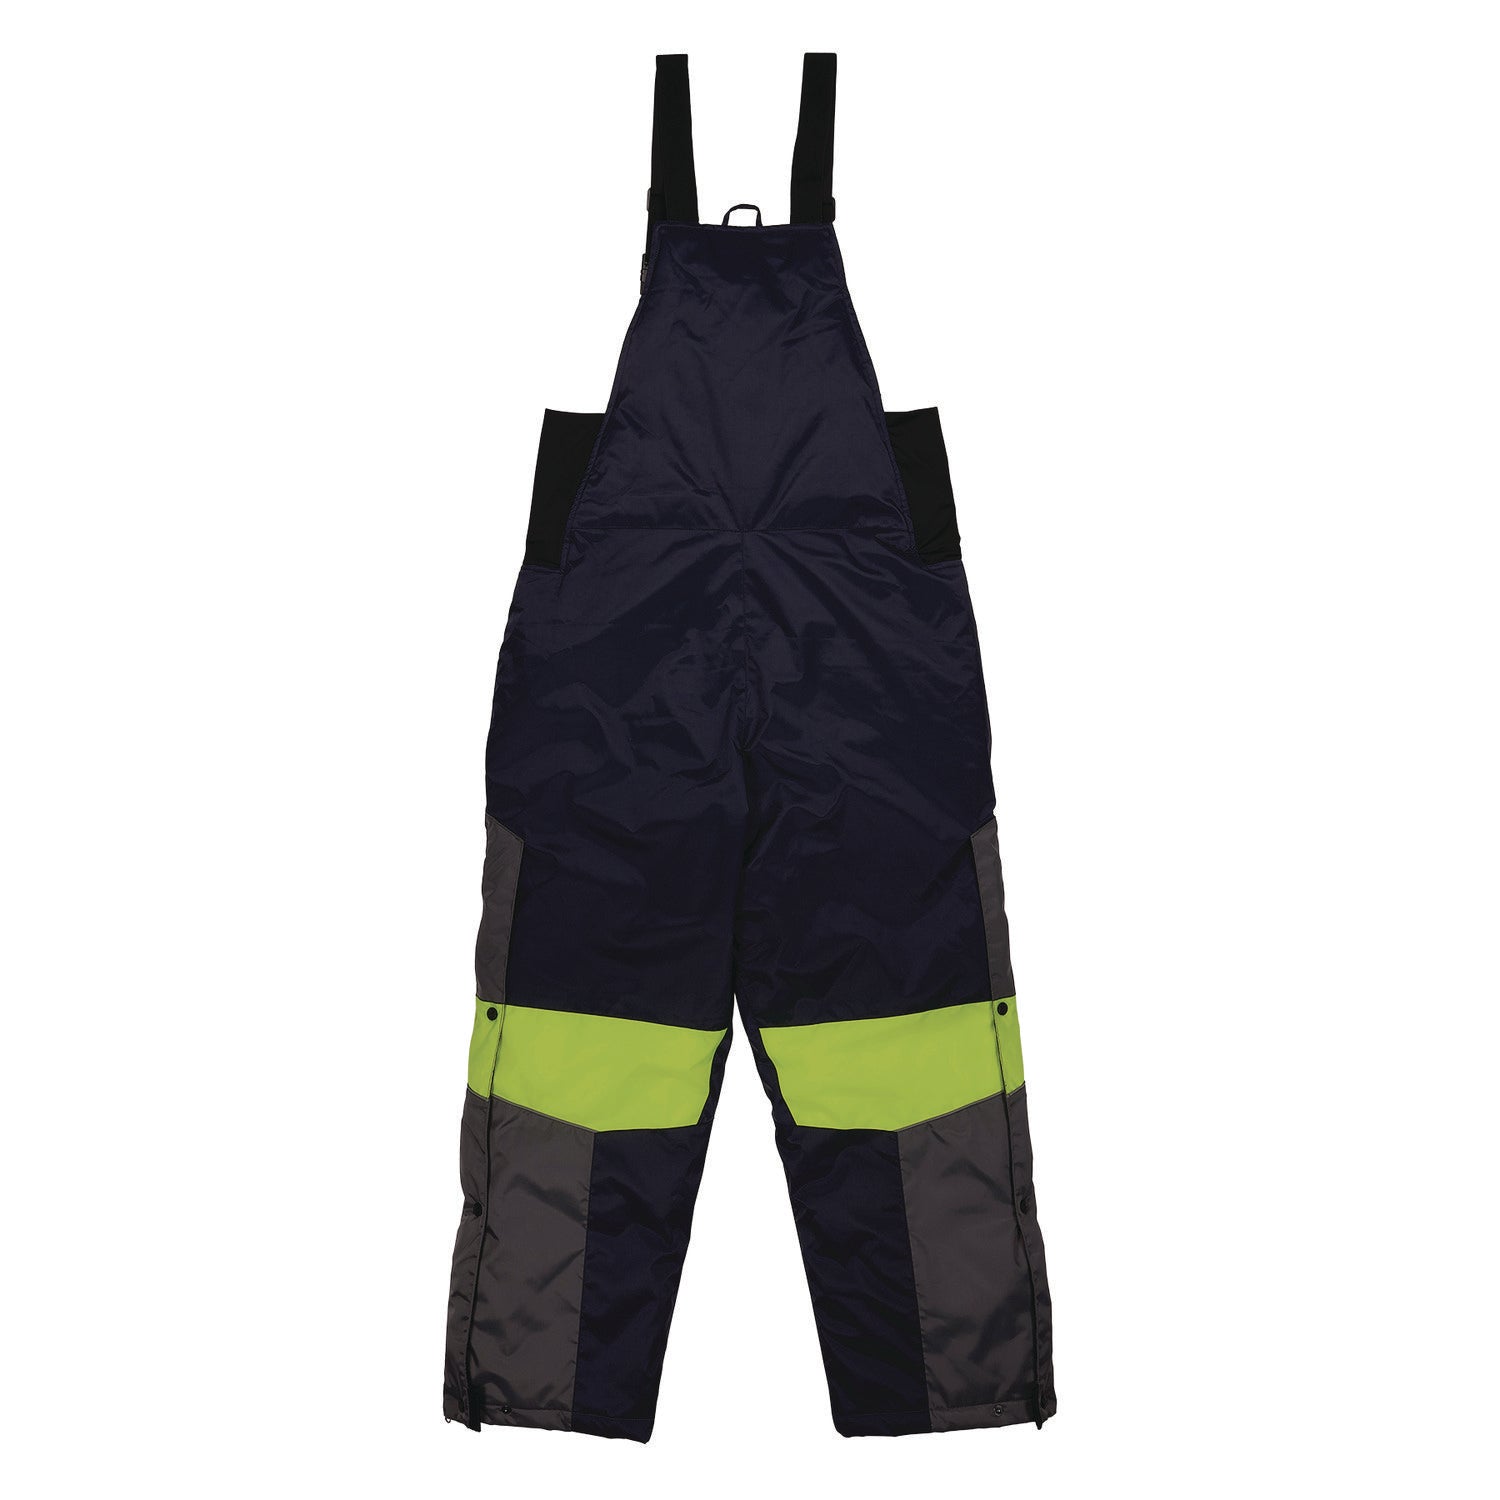 n-ferno-6477-insulated-cooler-bib-overall-large-navy-ships-in-1-3-business-days_ego41264 - 2